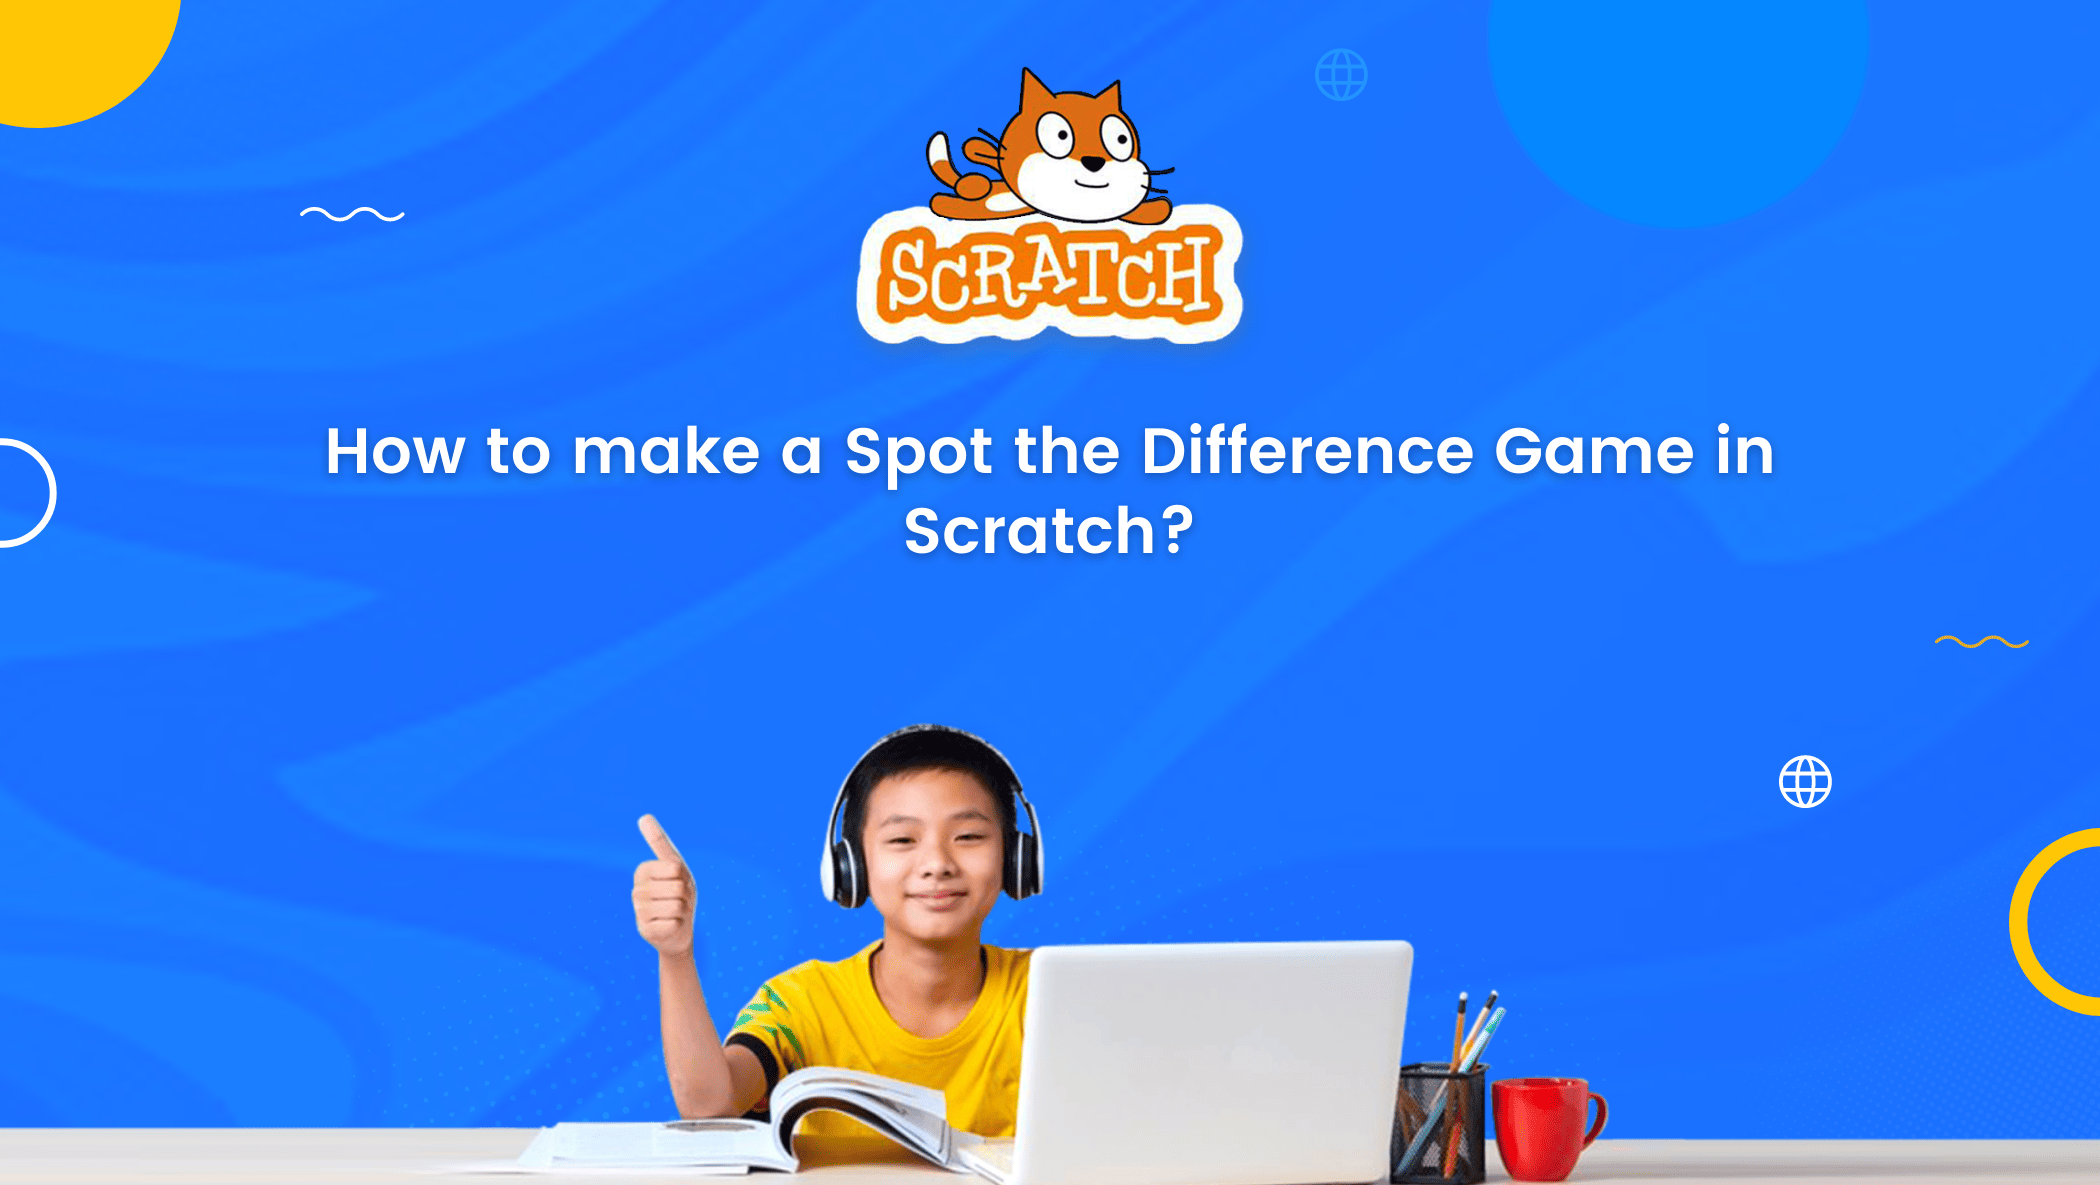 How to make a Spot the Difference Game in Scratch